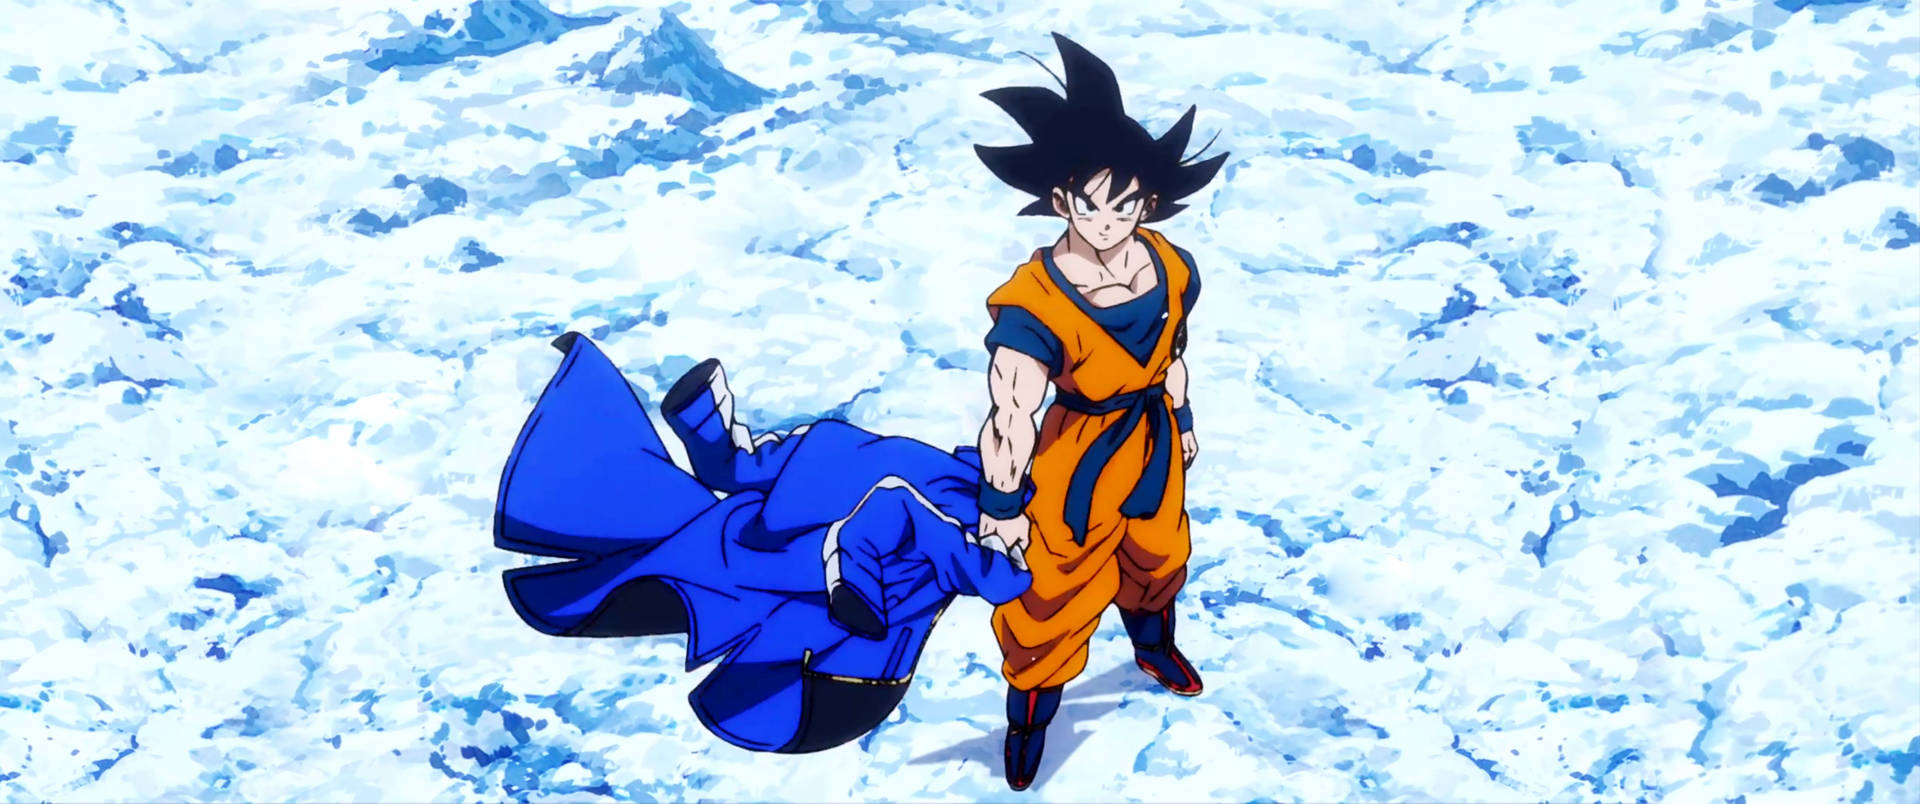 Son Goku ready to fight in Dragon Ball Super Broly Wallpaper